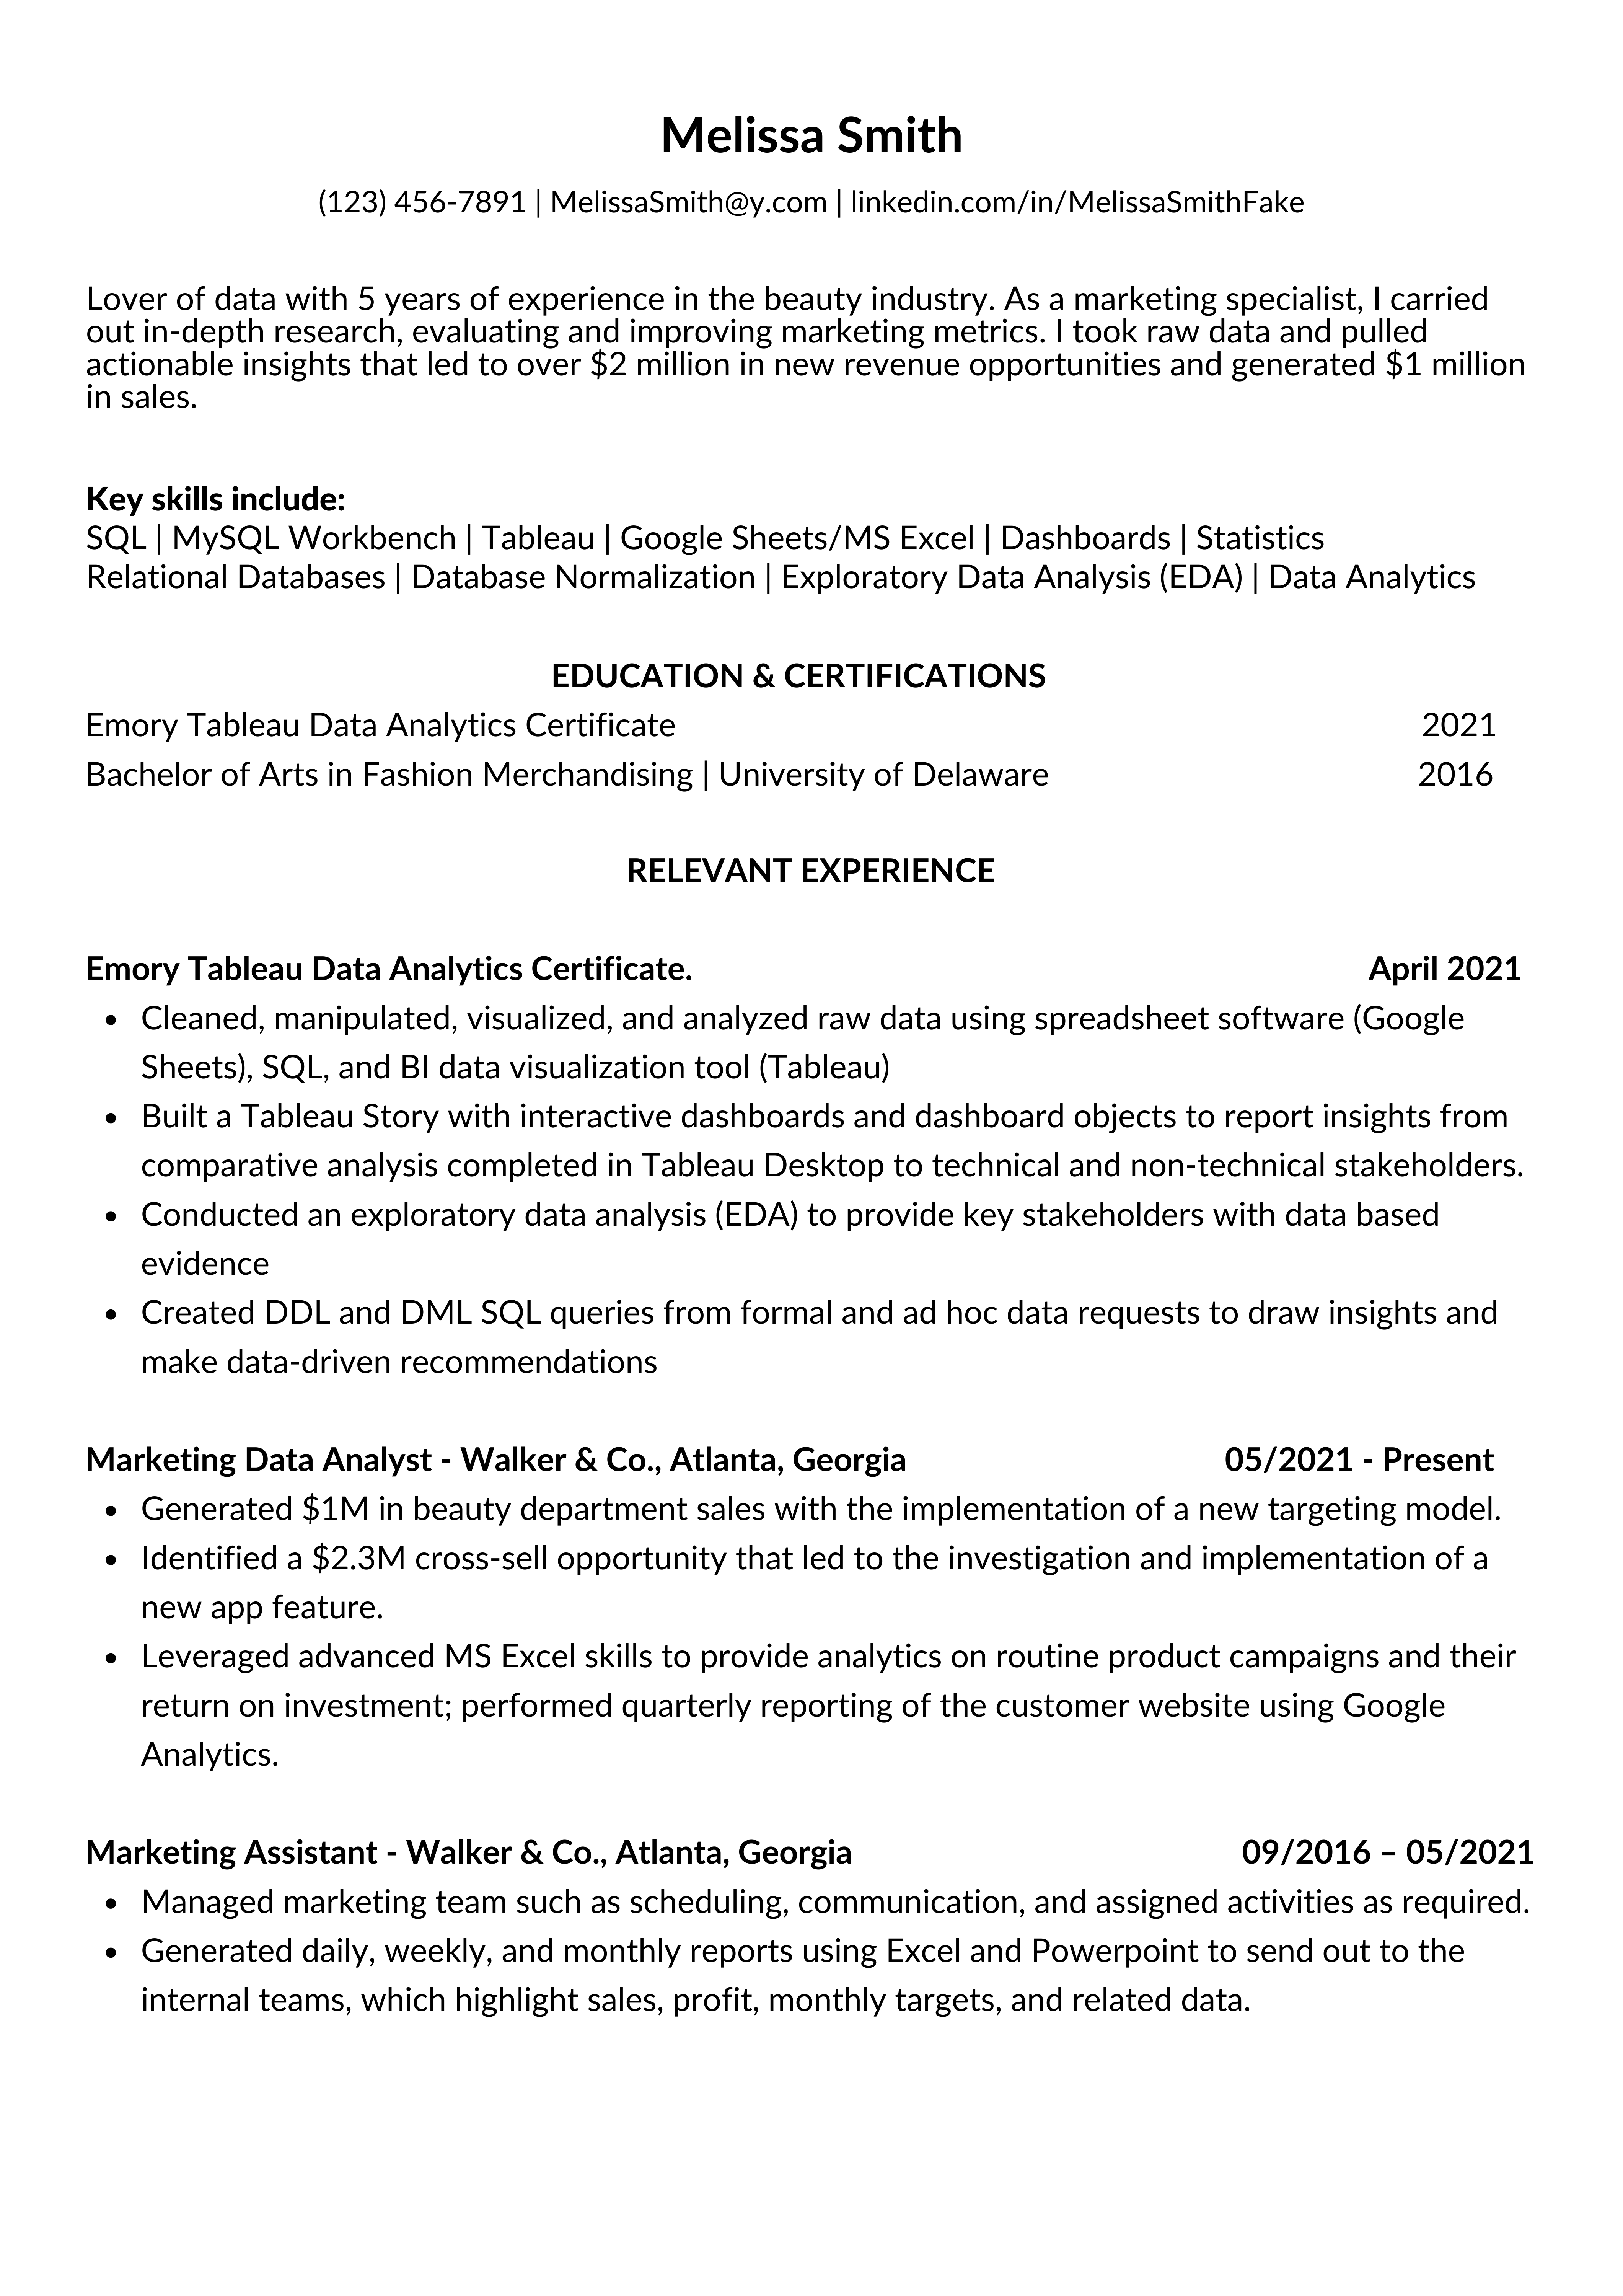 Data Analyst resume with minimal data experience